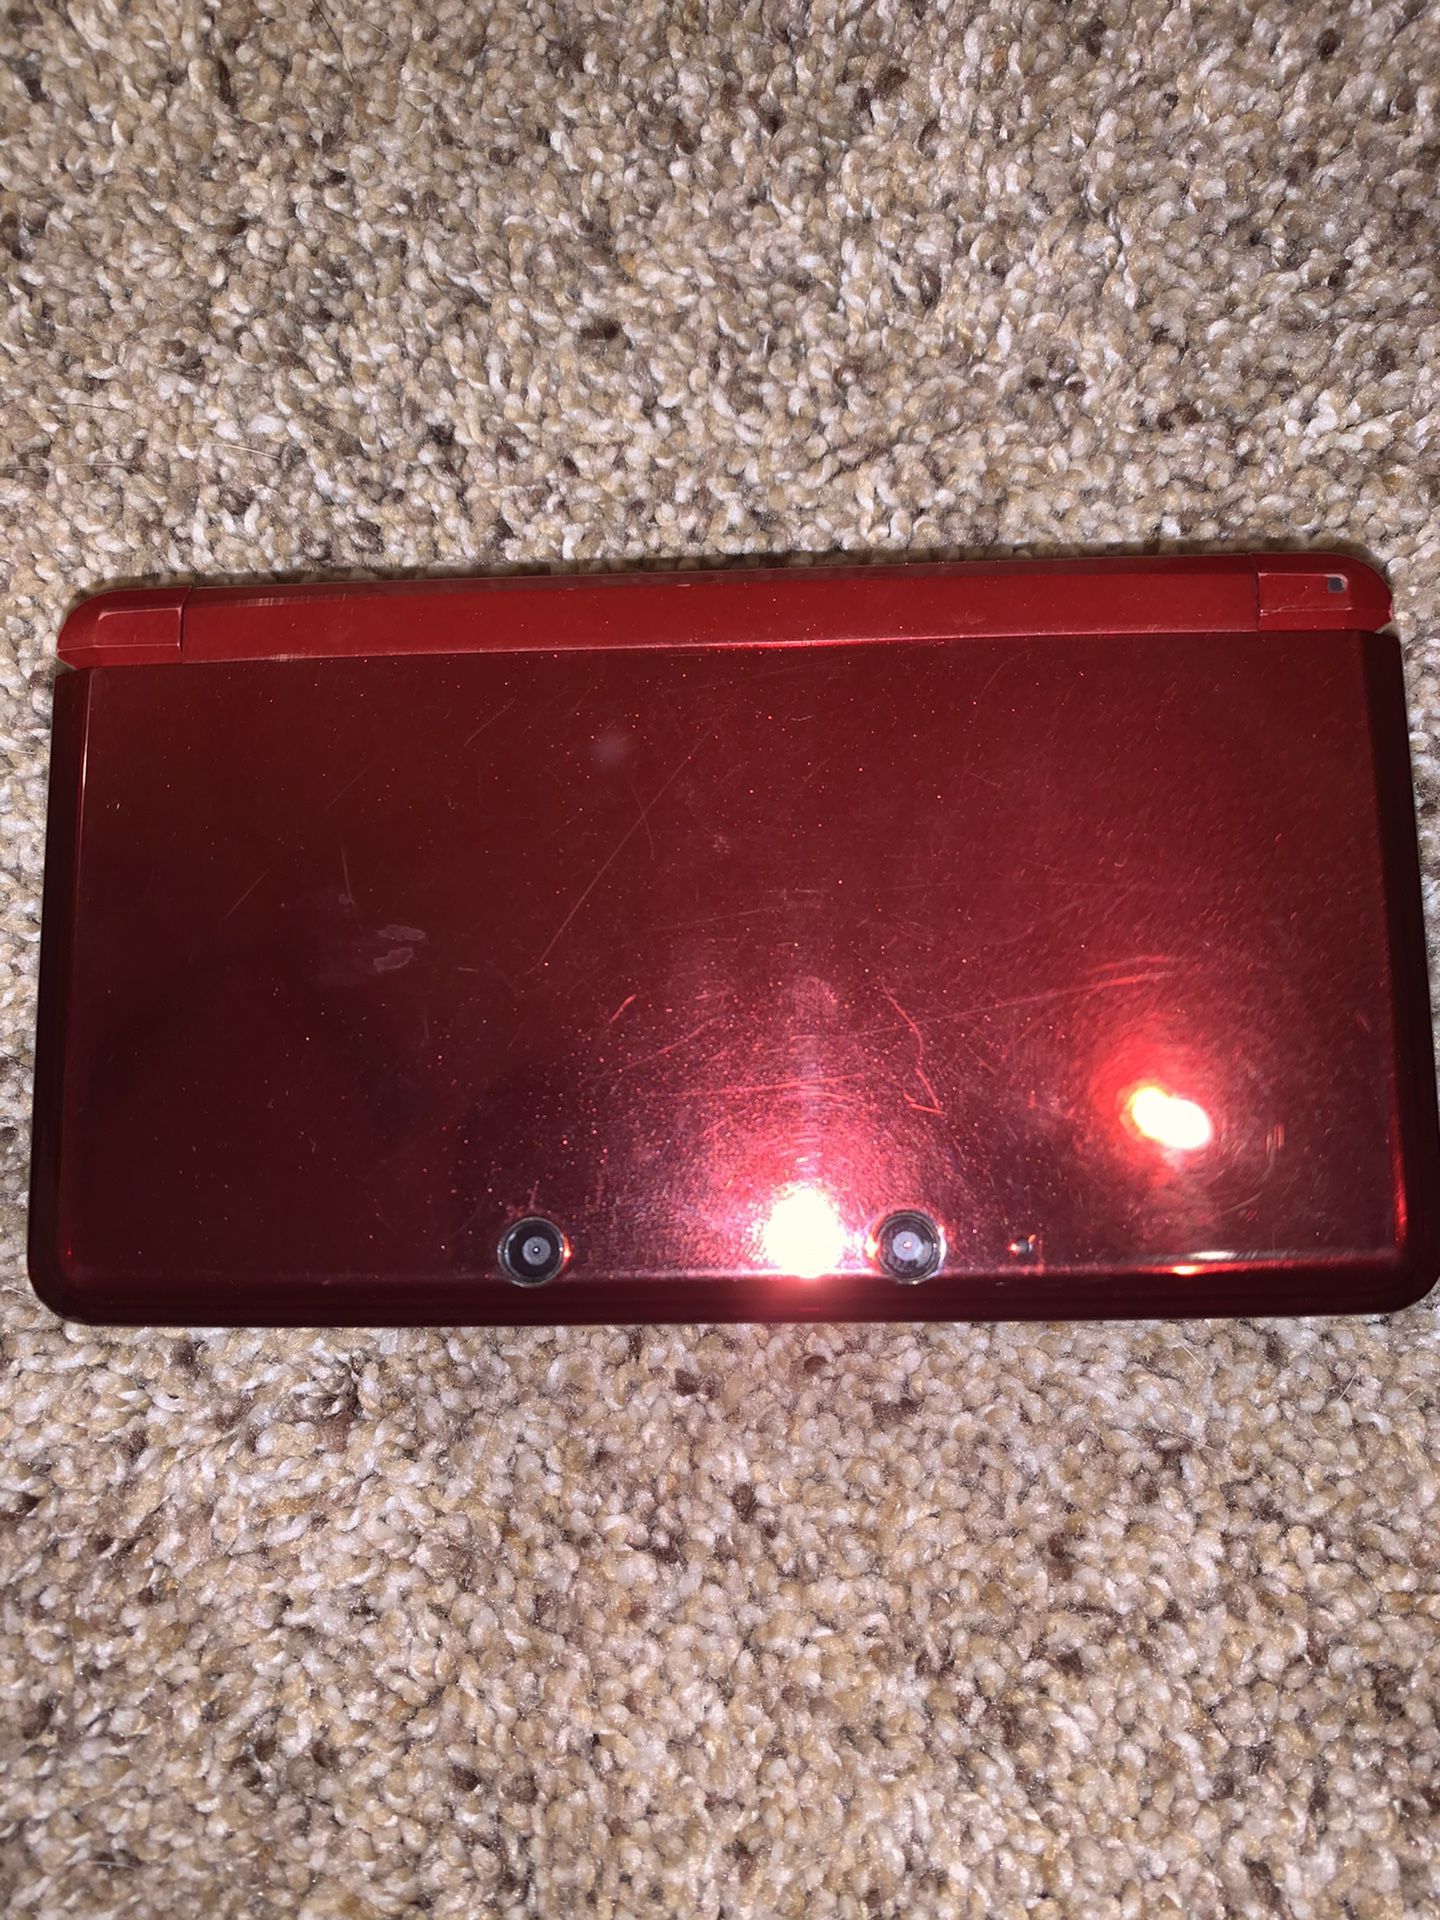 Nintendo 3DS w/ charger and Mariokart7